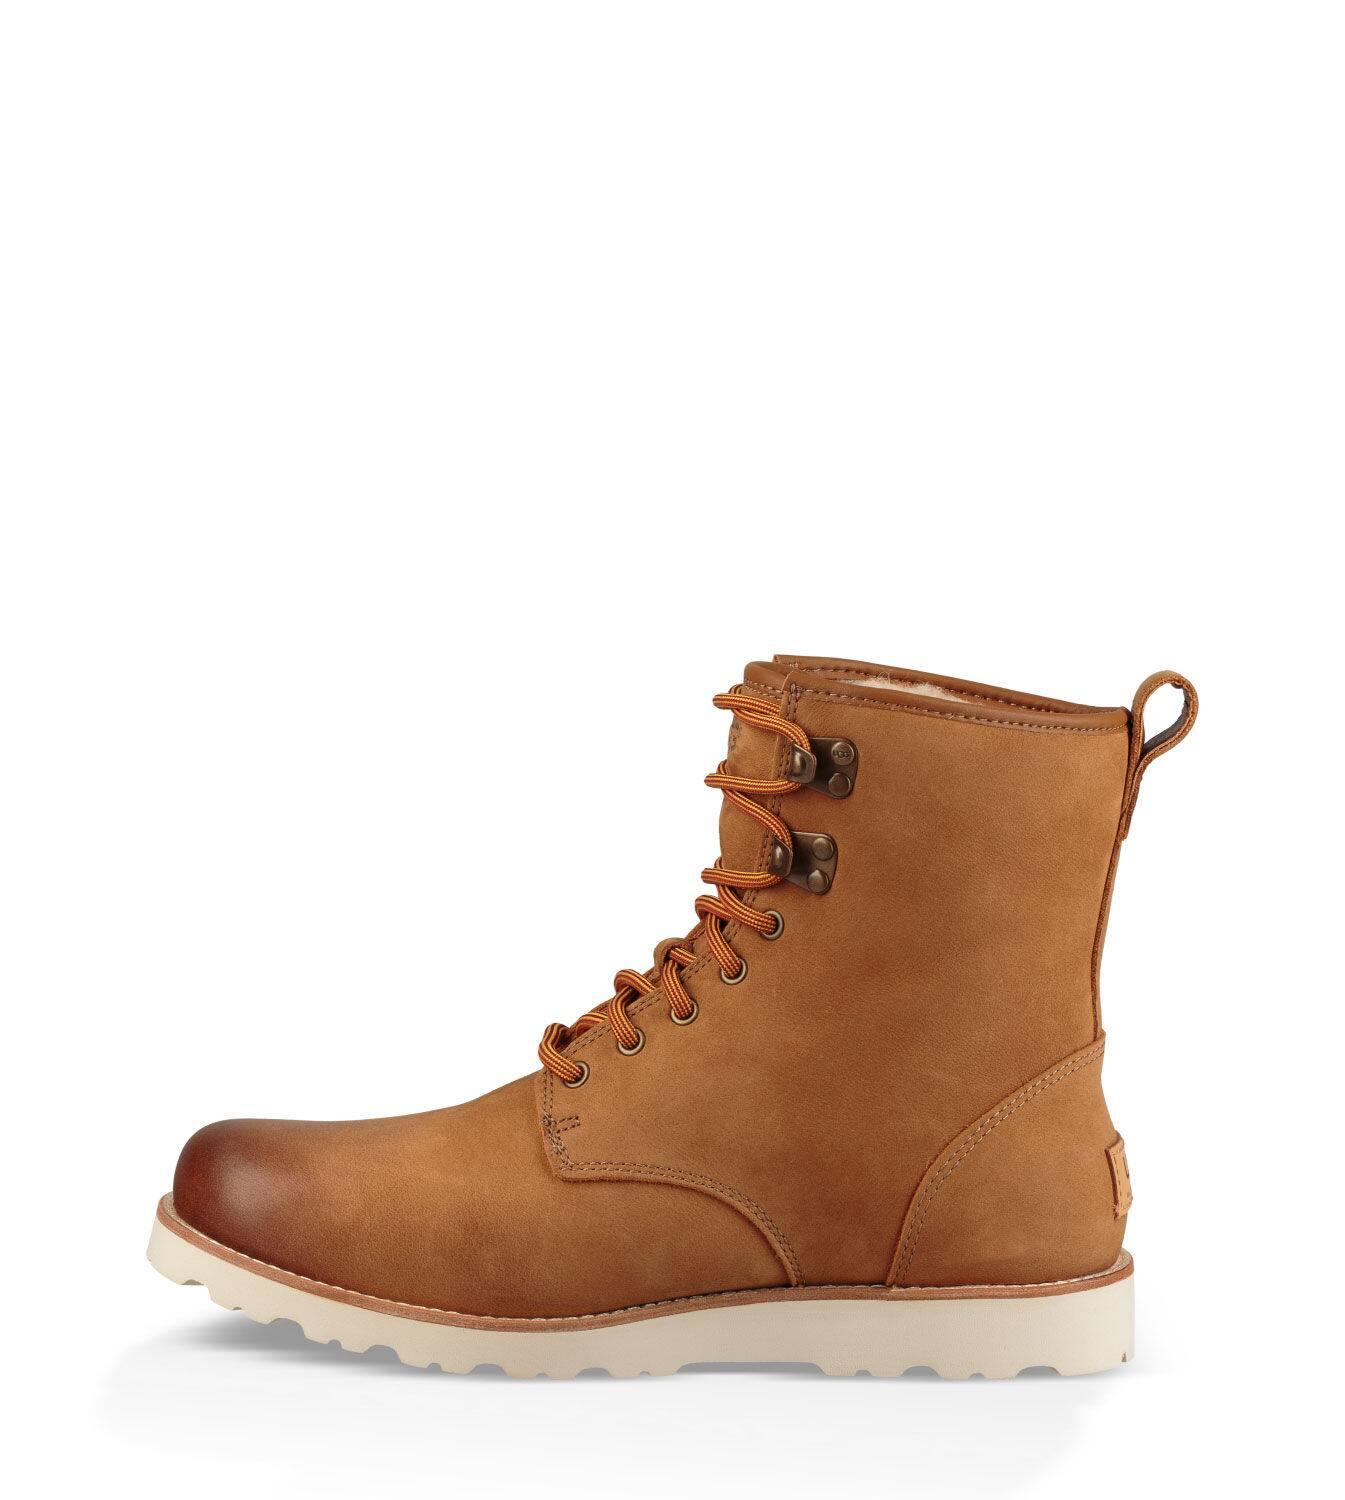 UGG Leather Hannen Tl Boot in Chestnut (Brown) for Men - Lyst